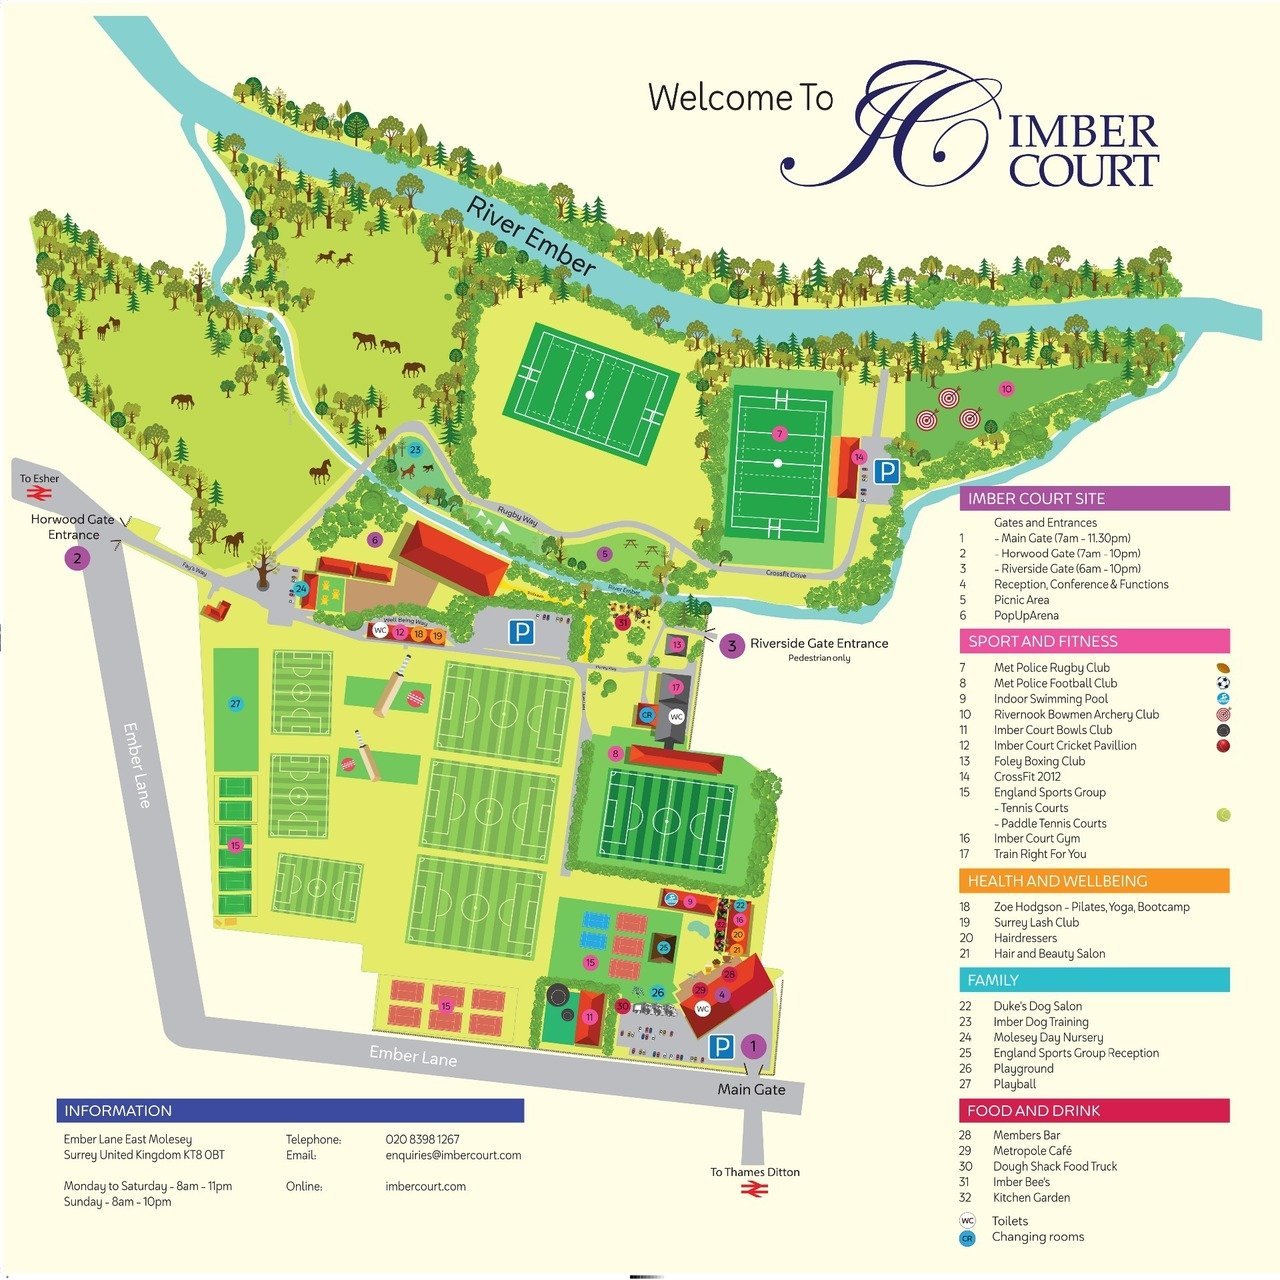 Map of Imber Court grounds